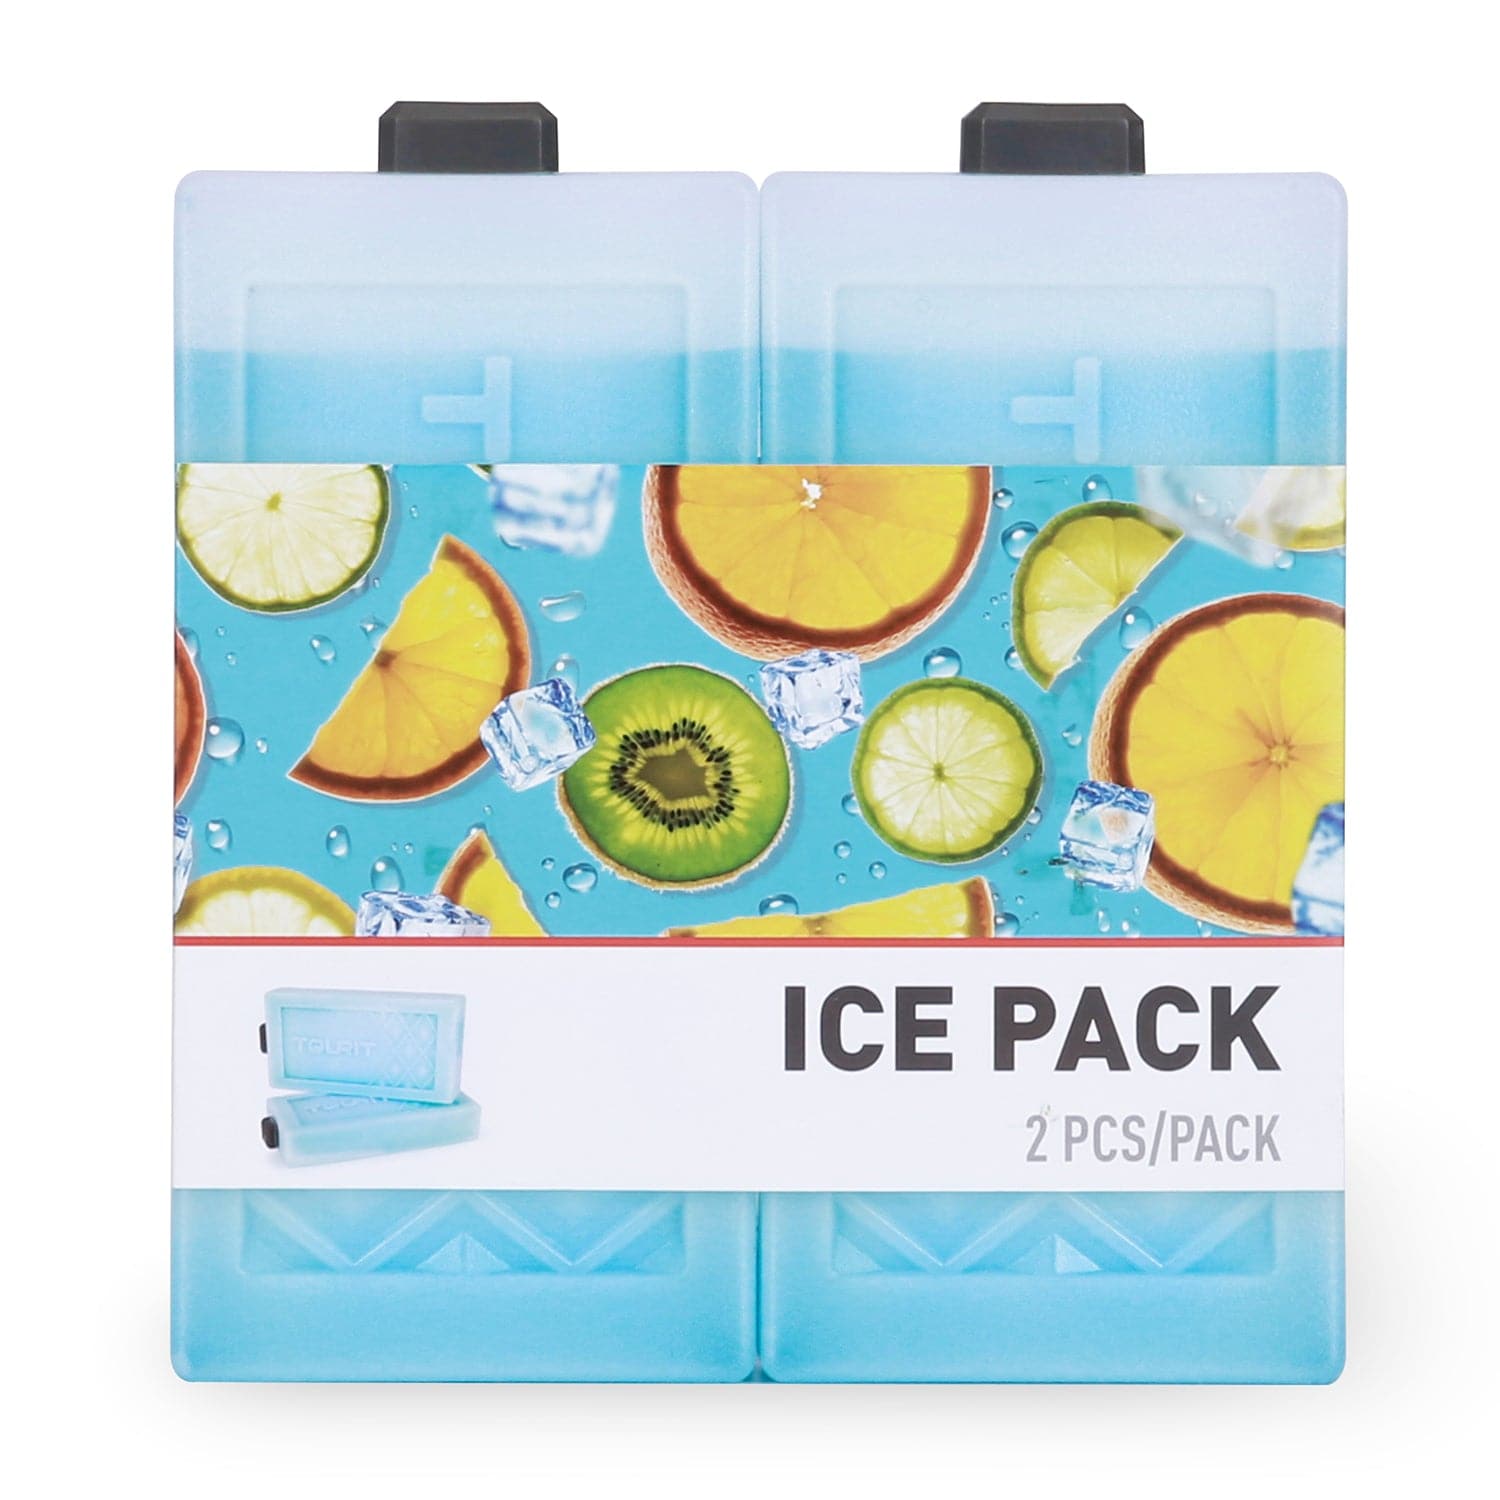 Reusable Soft Kids Ice Packs for Lunch Box – TOURIT